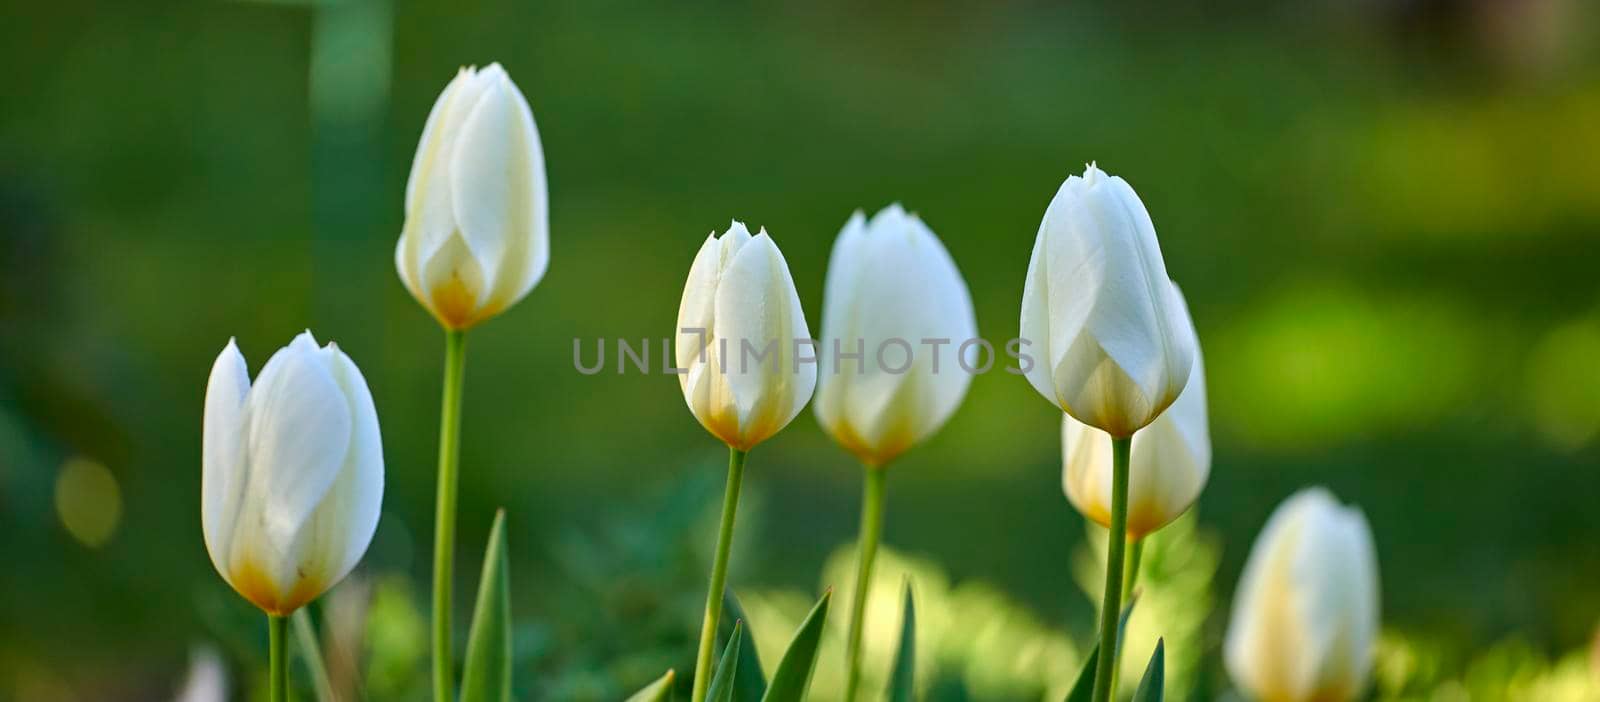 White tulip flowers growing, blossoming and flowering in lush green home garden, symbolising love, hope and affection. Bunch of decorative plants blooming in landscaped backyard through horticulture.